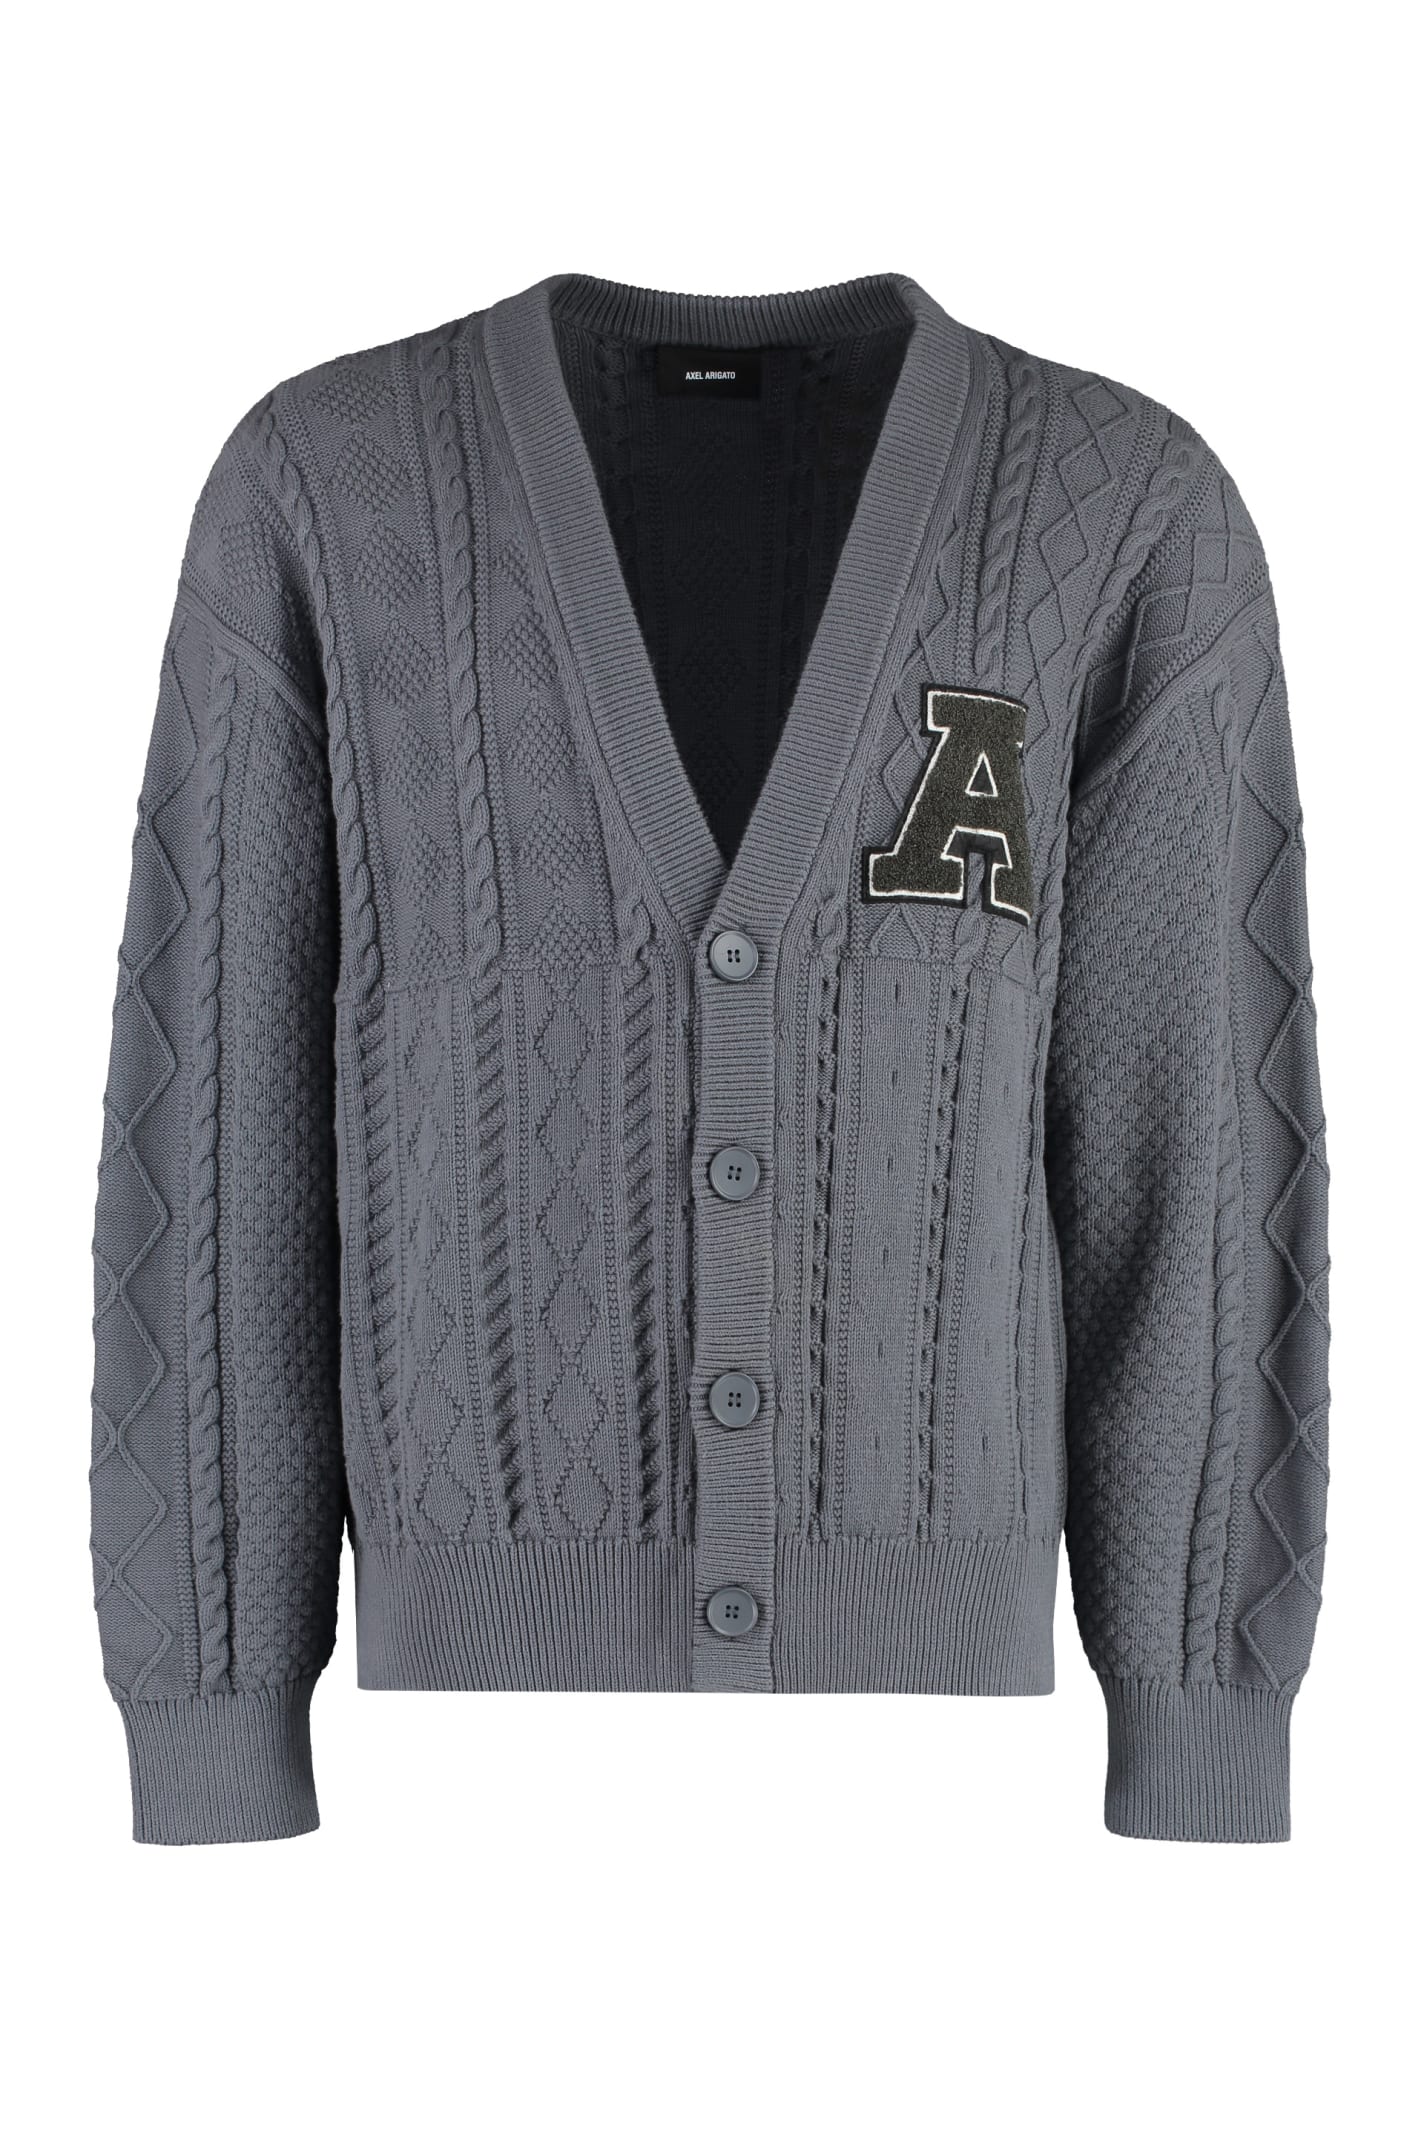 Axel Arigato Cable Knit Cardigan